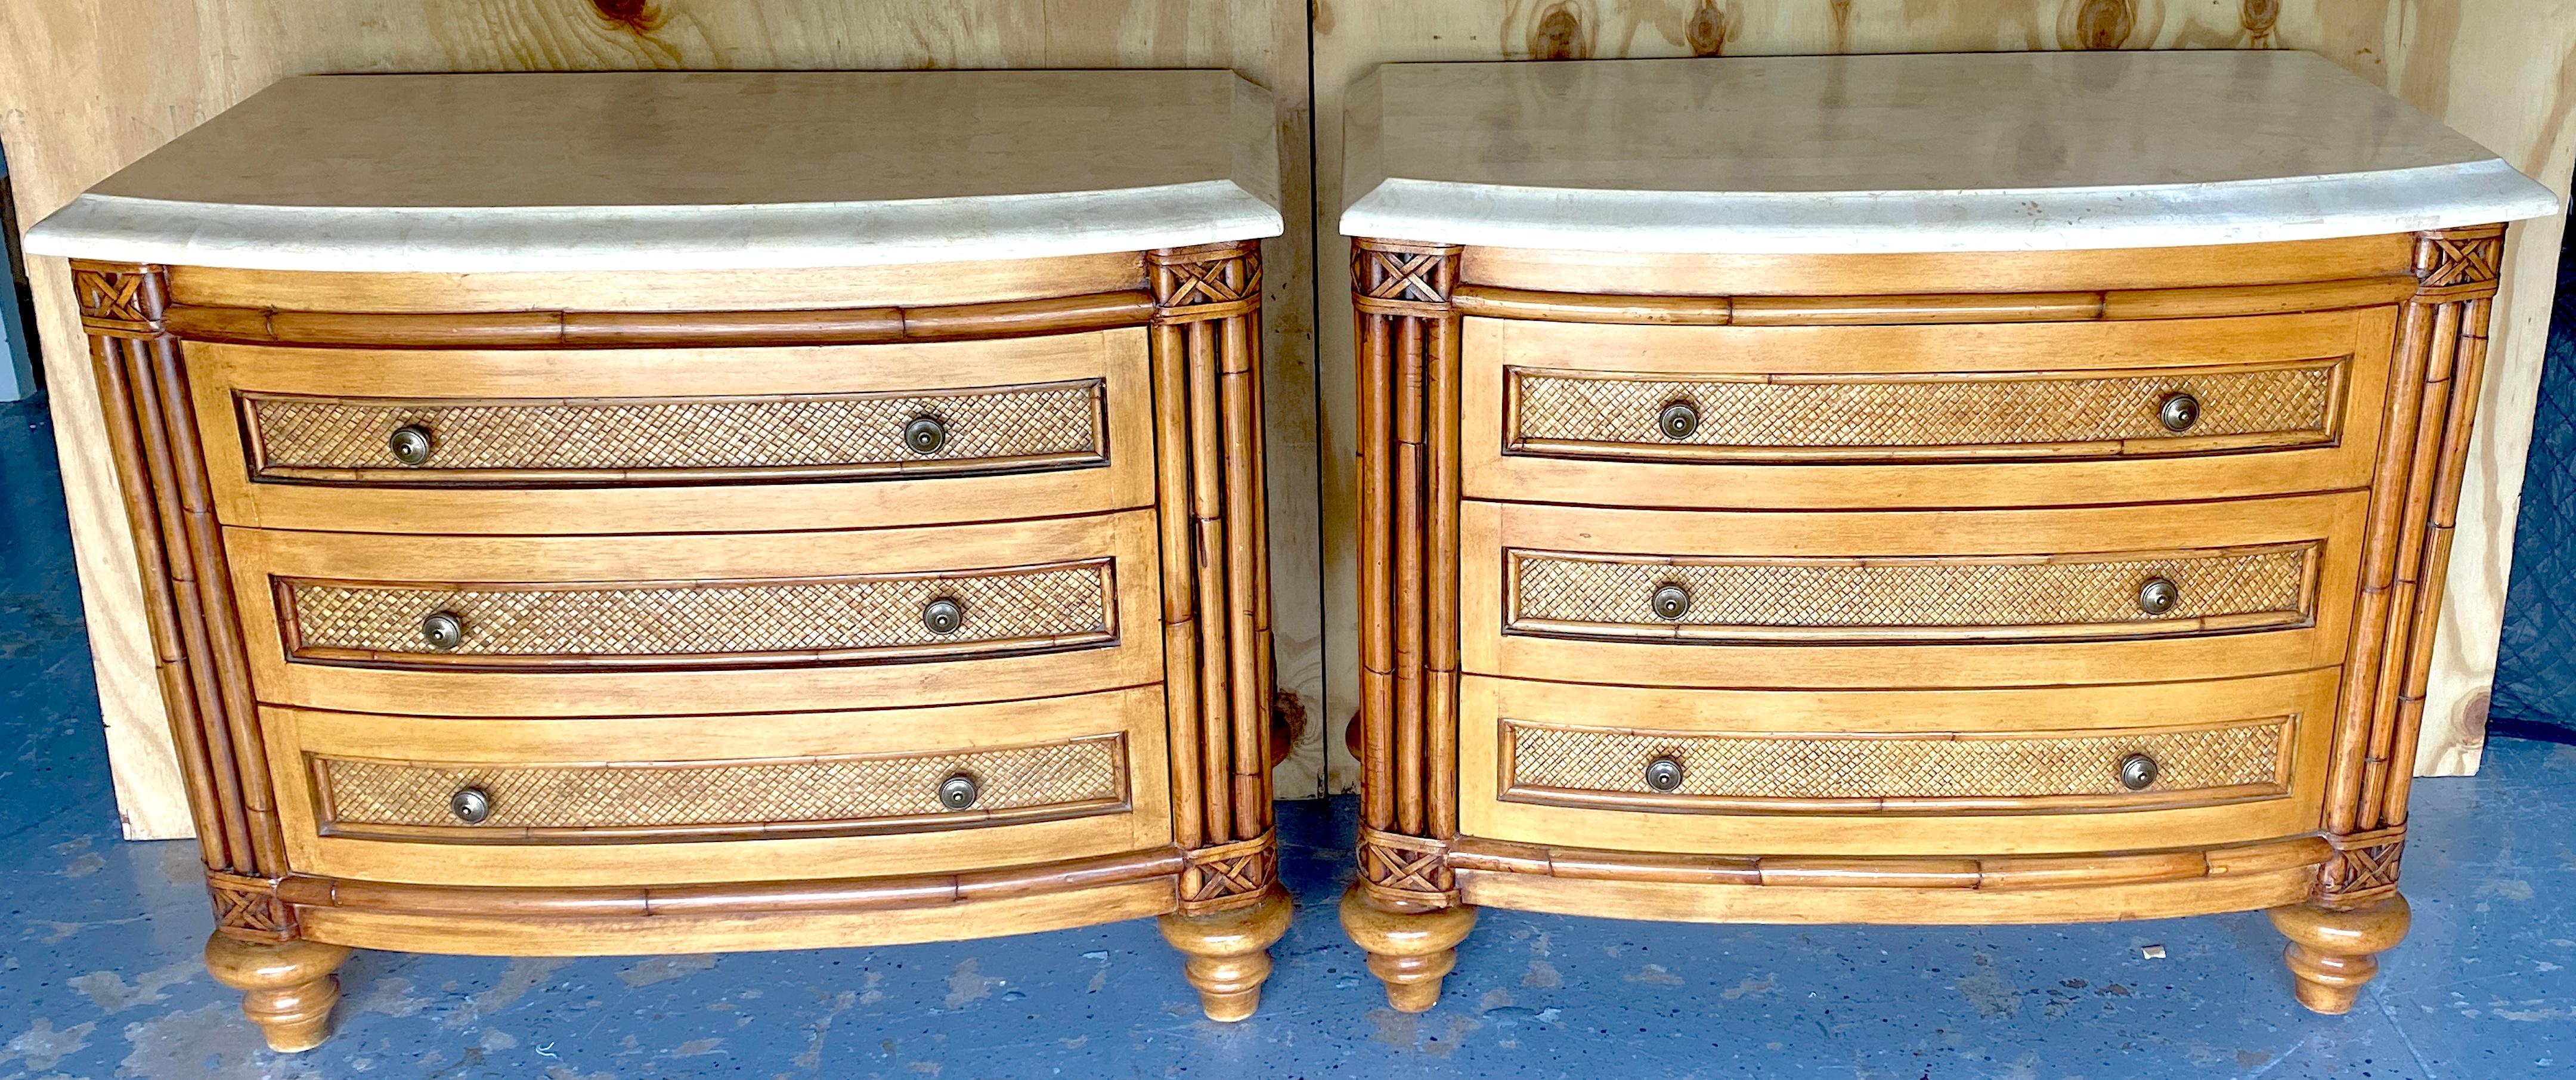 Pair British Colonial Style Bamboo, Rattan, Tessellated StoneChests/Nightstands  For Sale 5